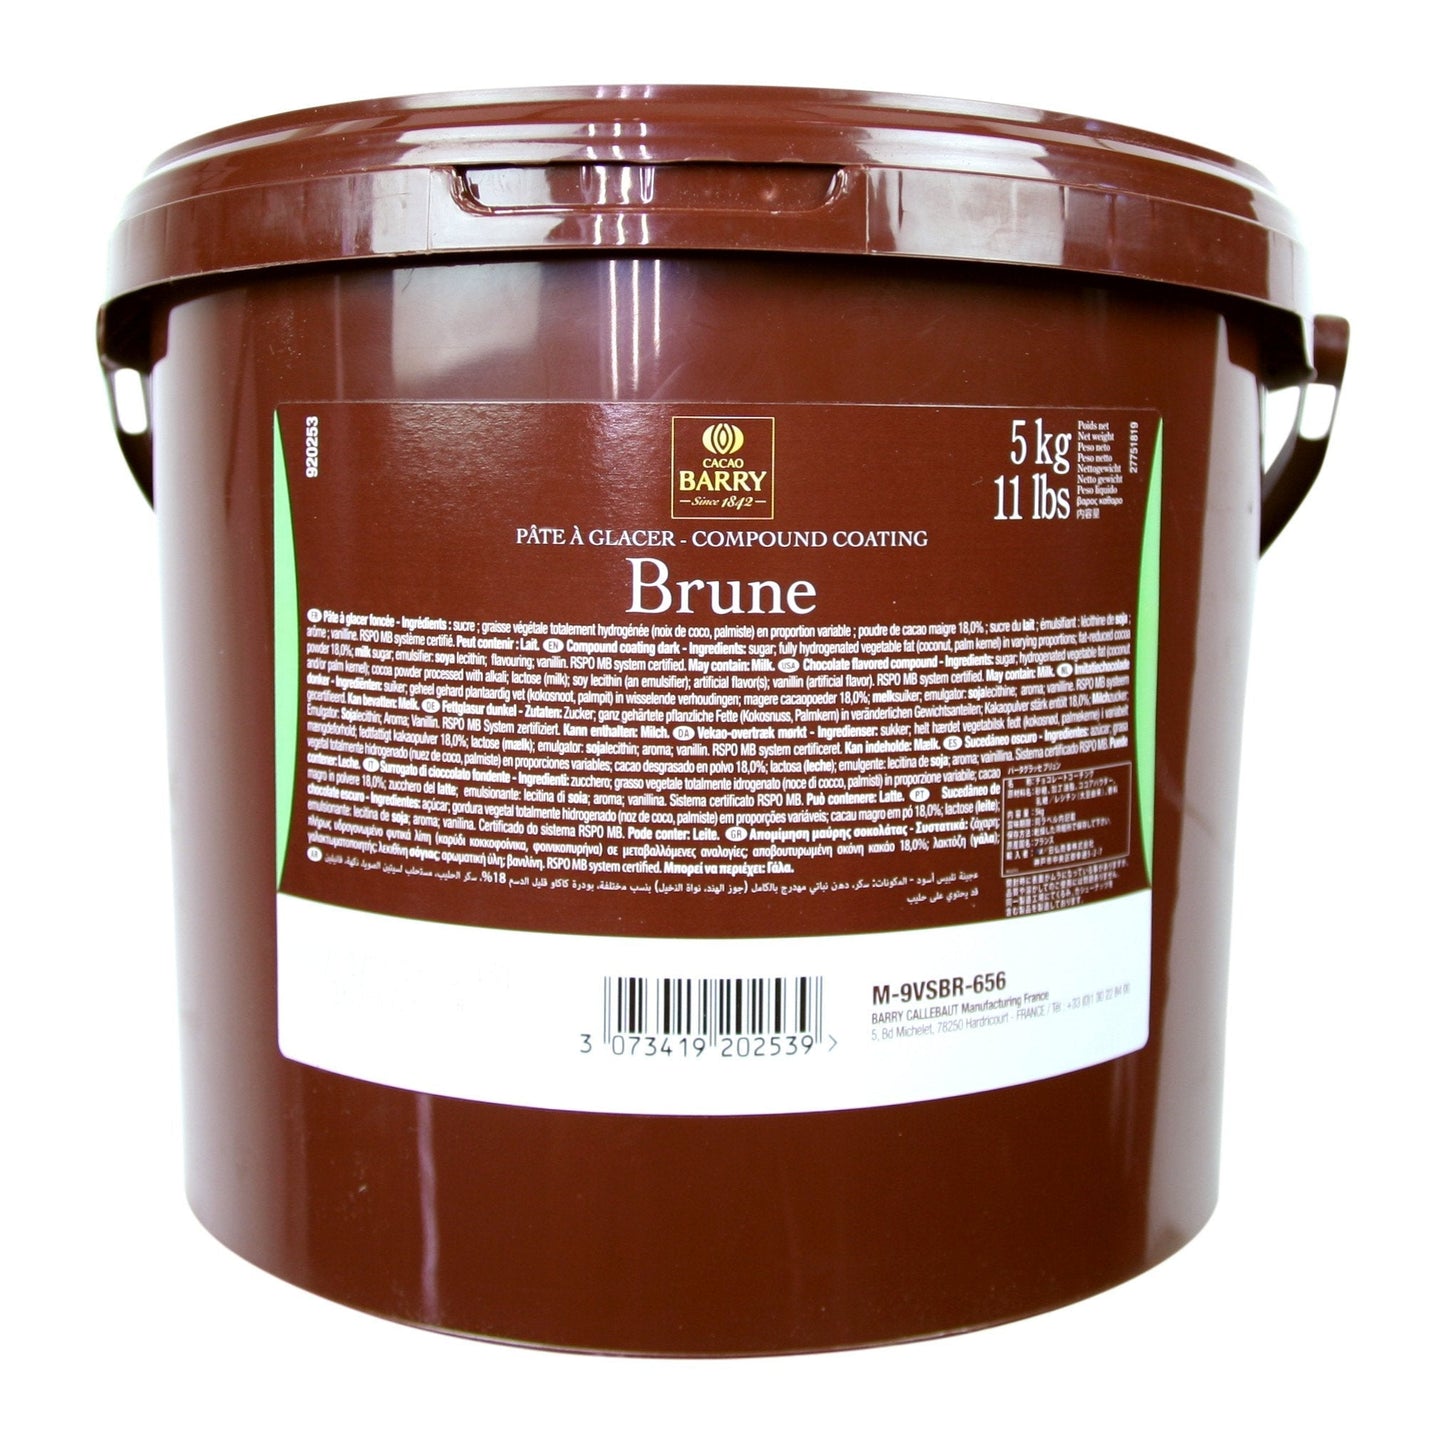 Brune Compound Coating-Cacao barry